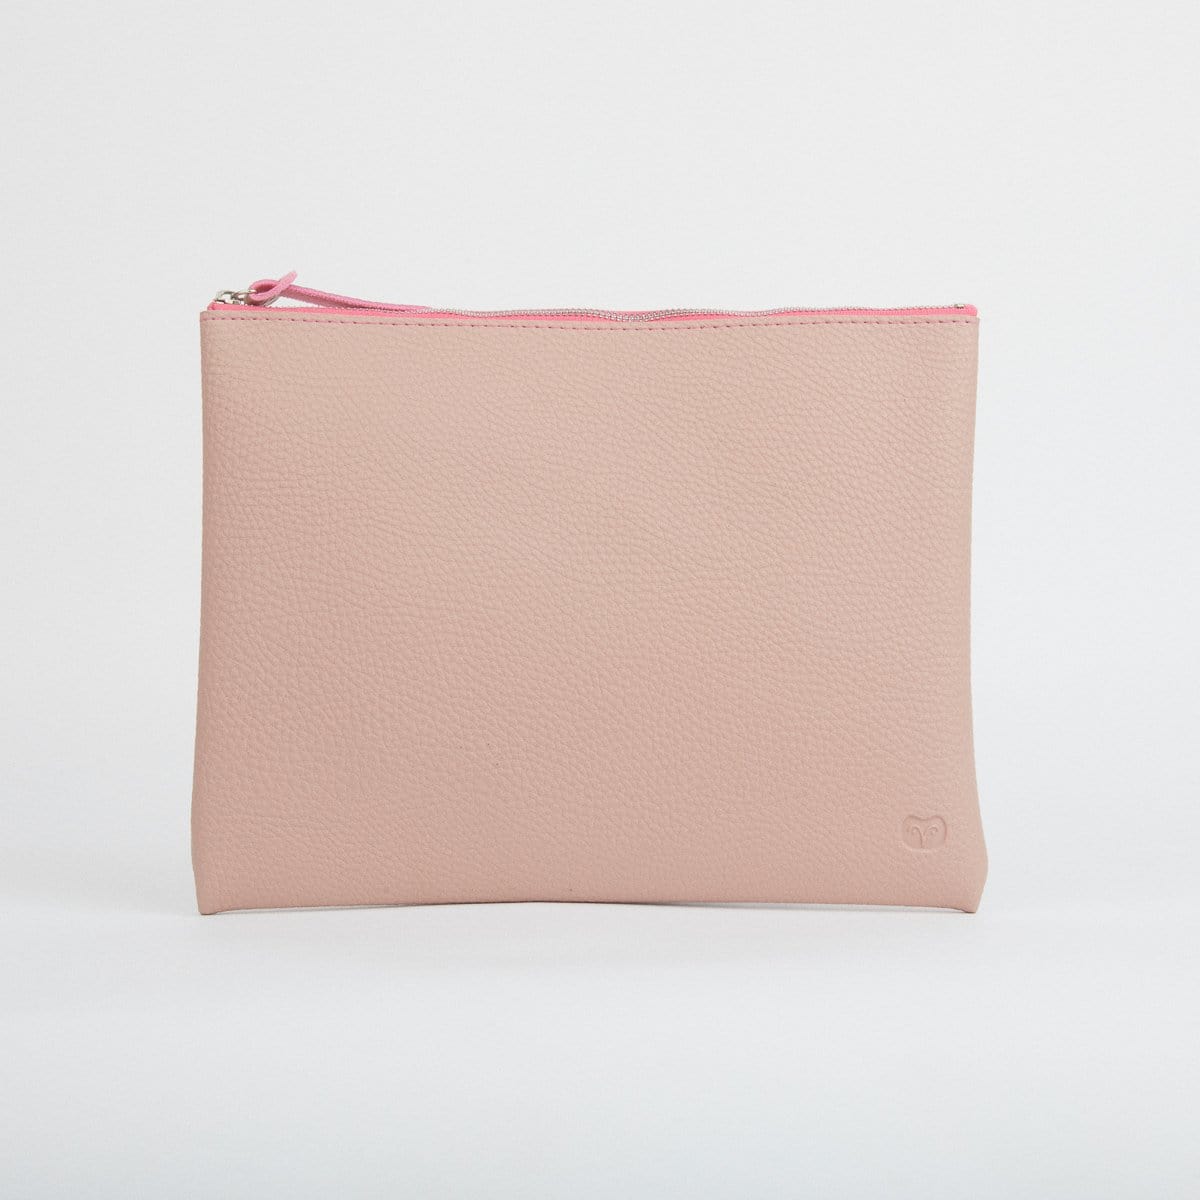 Tawny Large Pouch - vegan friendly gifts and accessories by goodeehoo